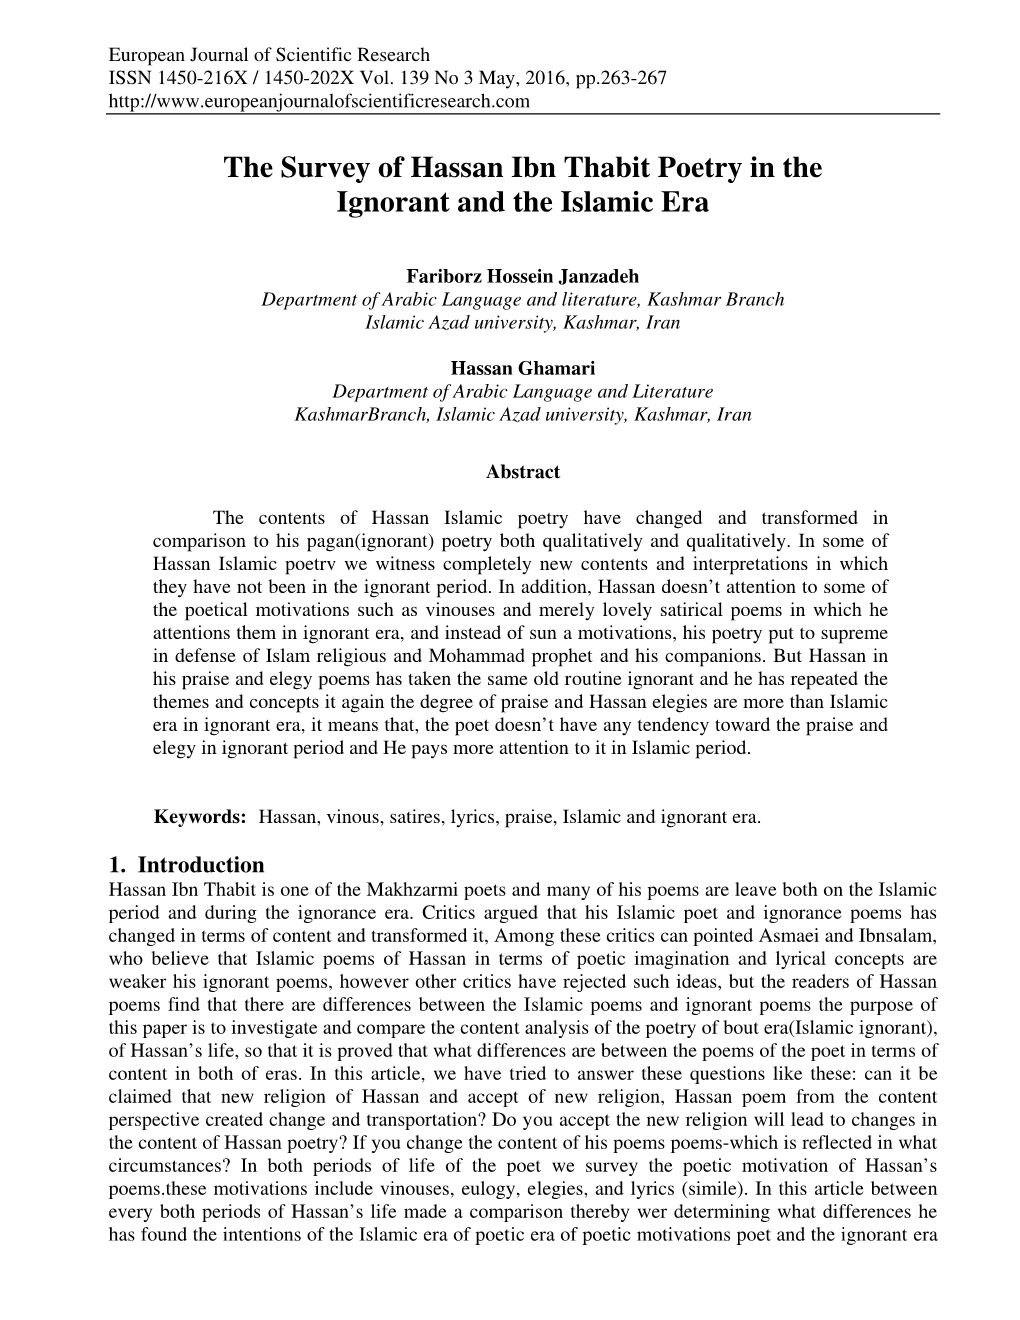 The Survey of Hassan Ibn Thabit Poetry in the Ignorant and the Islamic Era